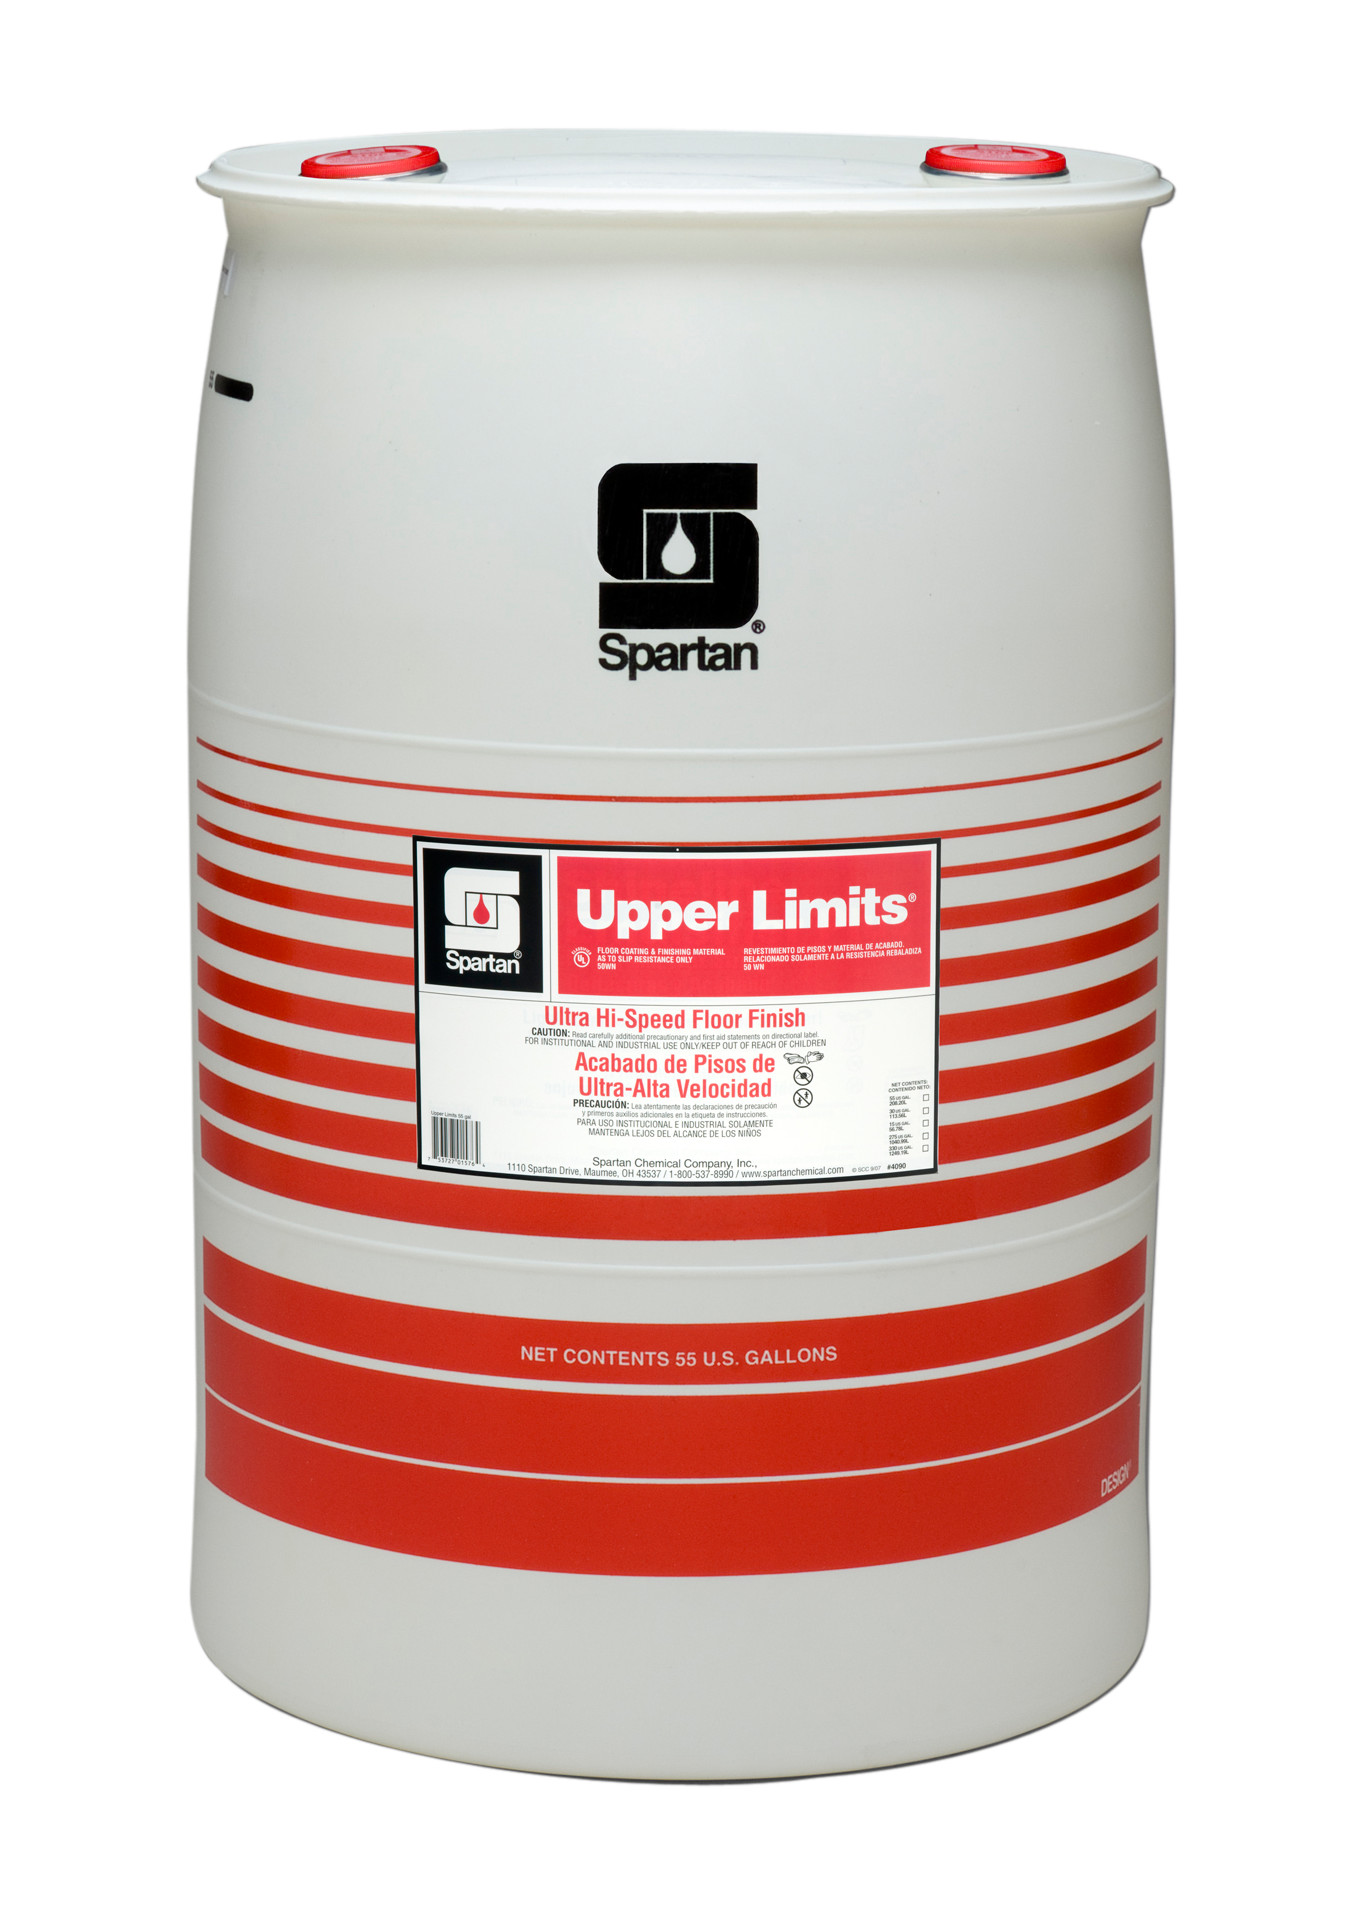 Spartan Chemical Company Upper Limits, 55 GAL DRUM